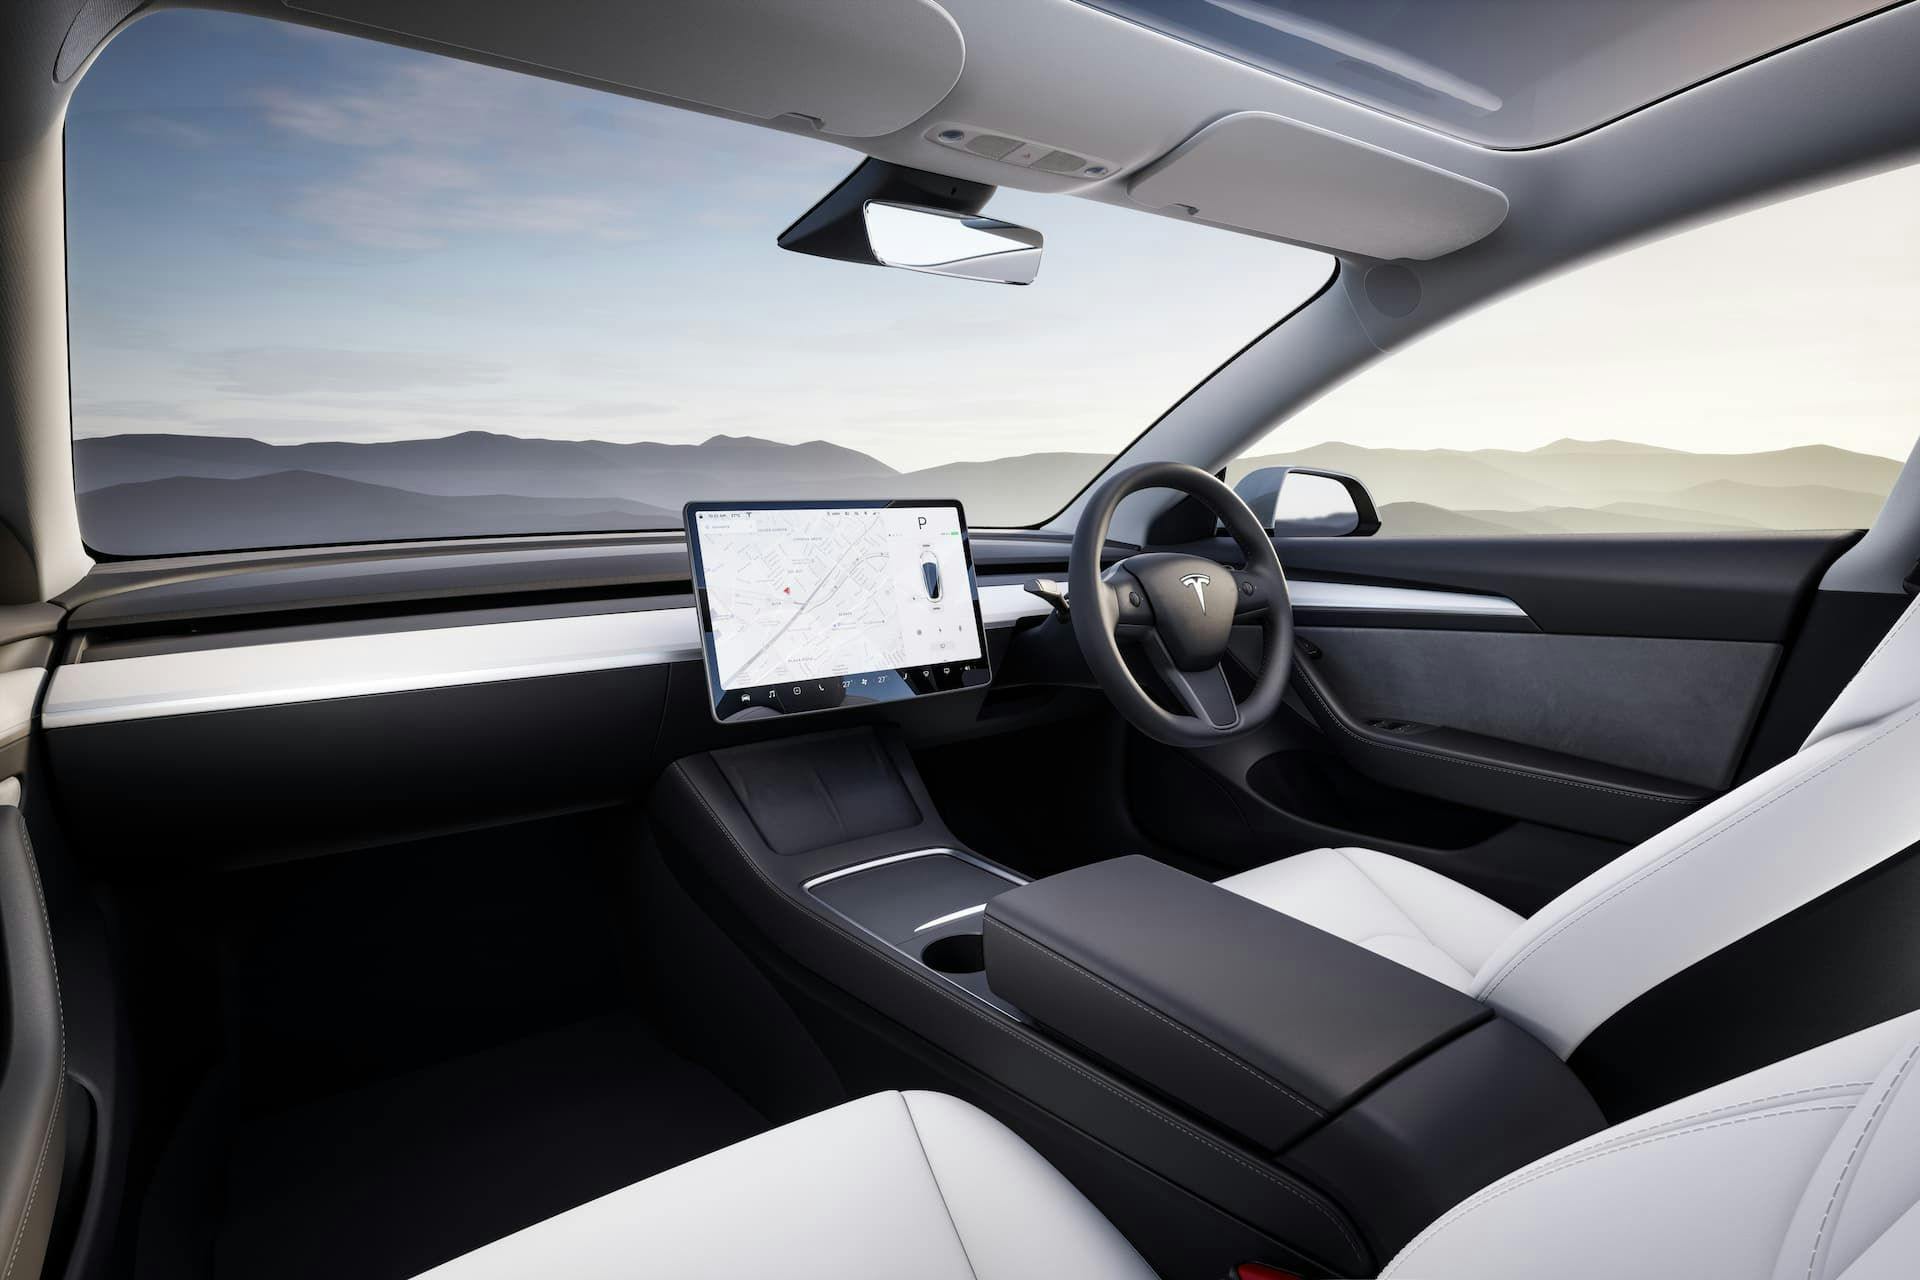 Why is the Tesla Model 3 so popular?